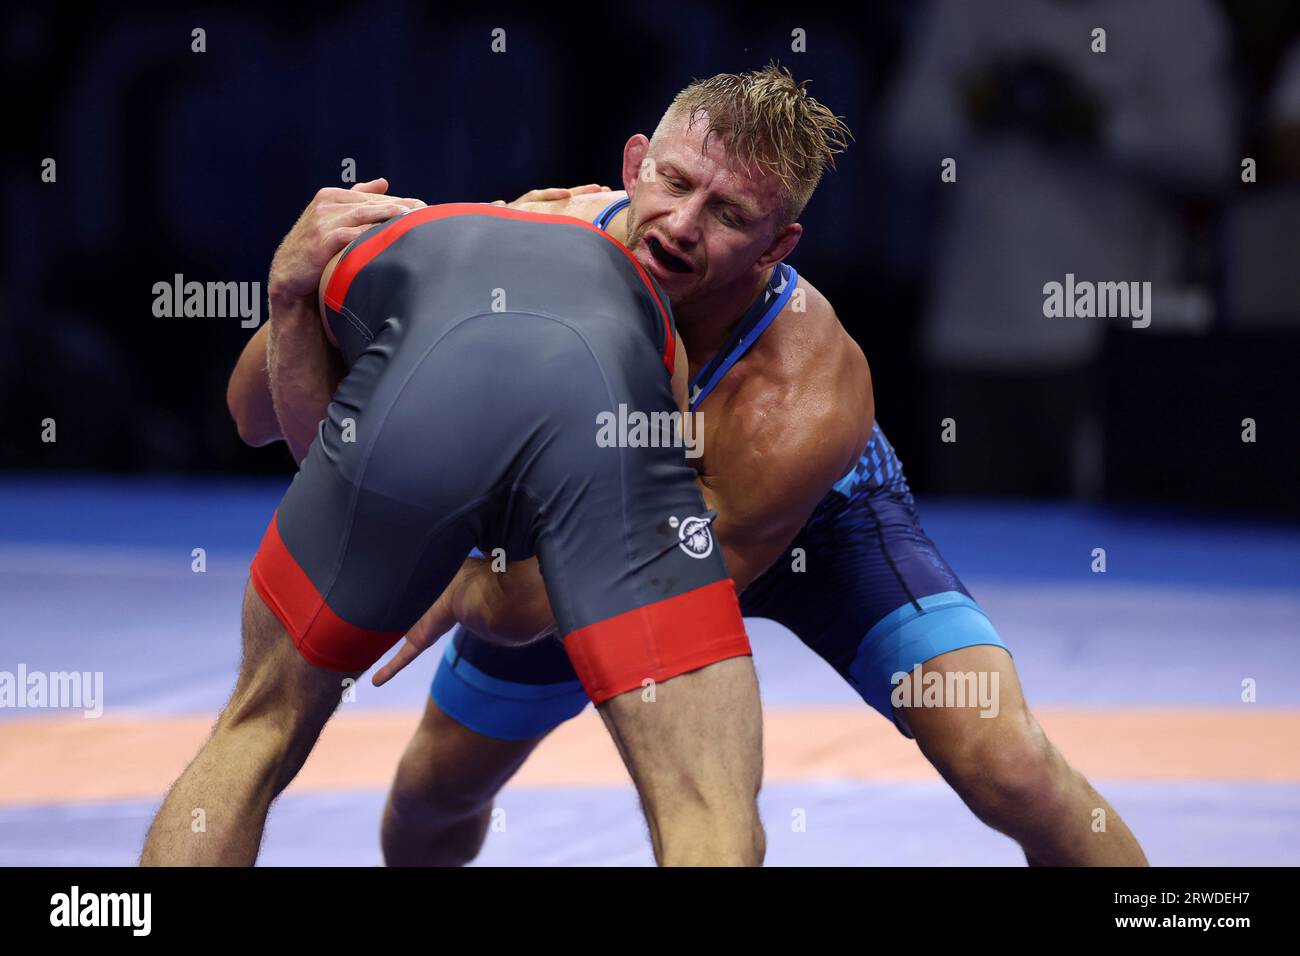 Kyle Douglas Dake of United States (blue) competes during the mens freestyle 74kg final match against Zaurbek Sidakov of Russia at the Wrestling World Championships in Belgrade, Serbia on September 18, 2023.